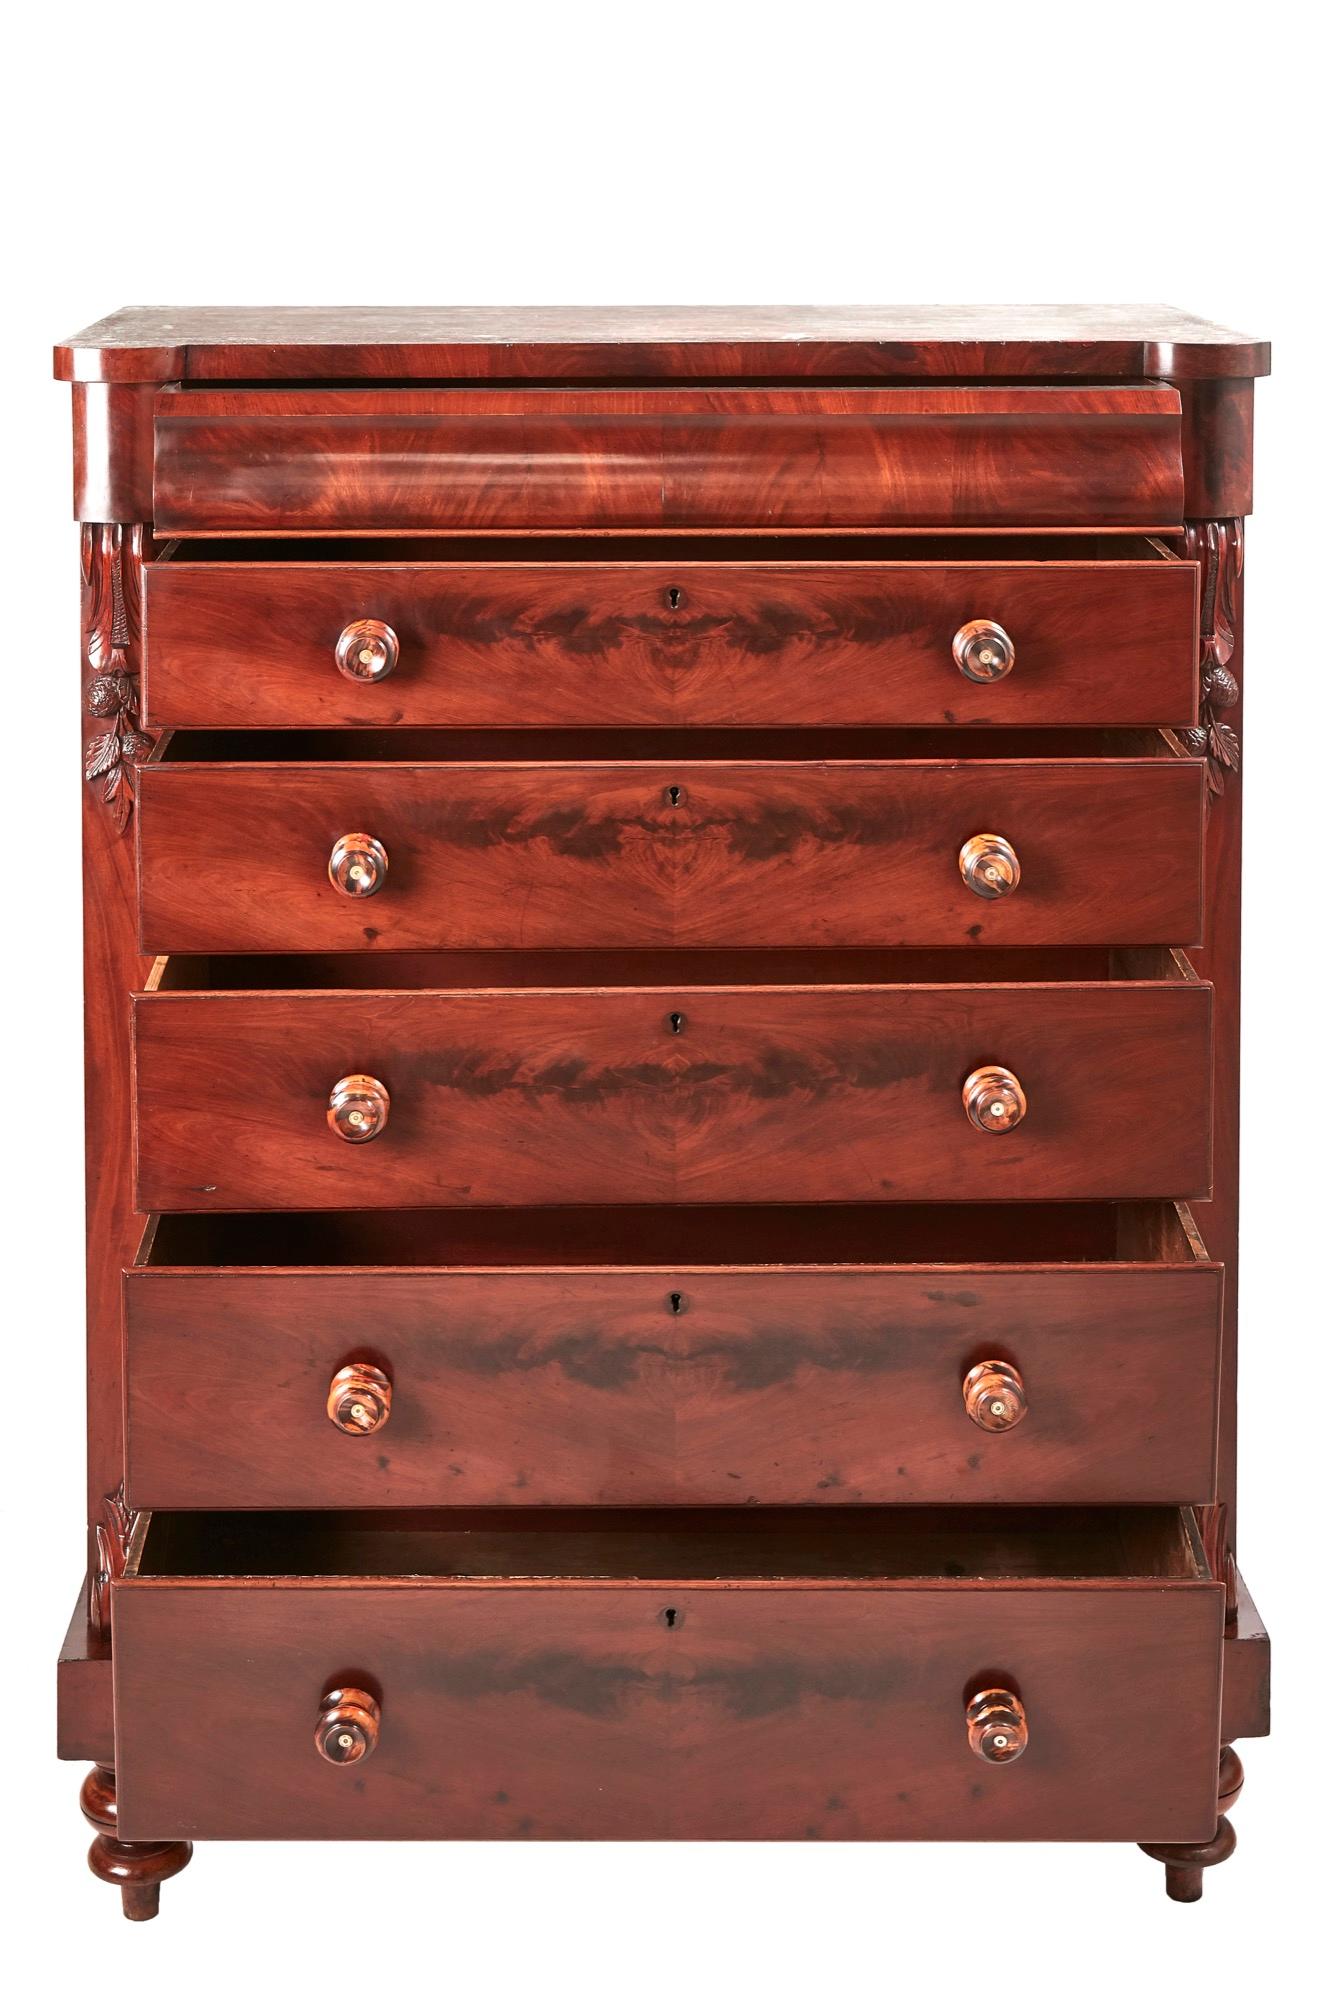 This is a quality antique tall 19th century Victorian antique mahogany chest of drawers having six long mahogany drawers with original turned knobs and attractively carved mahogany supports. It stands on a plinth base with turned feet.

An